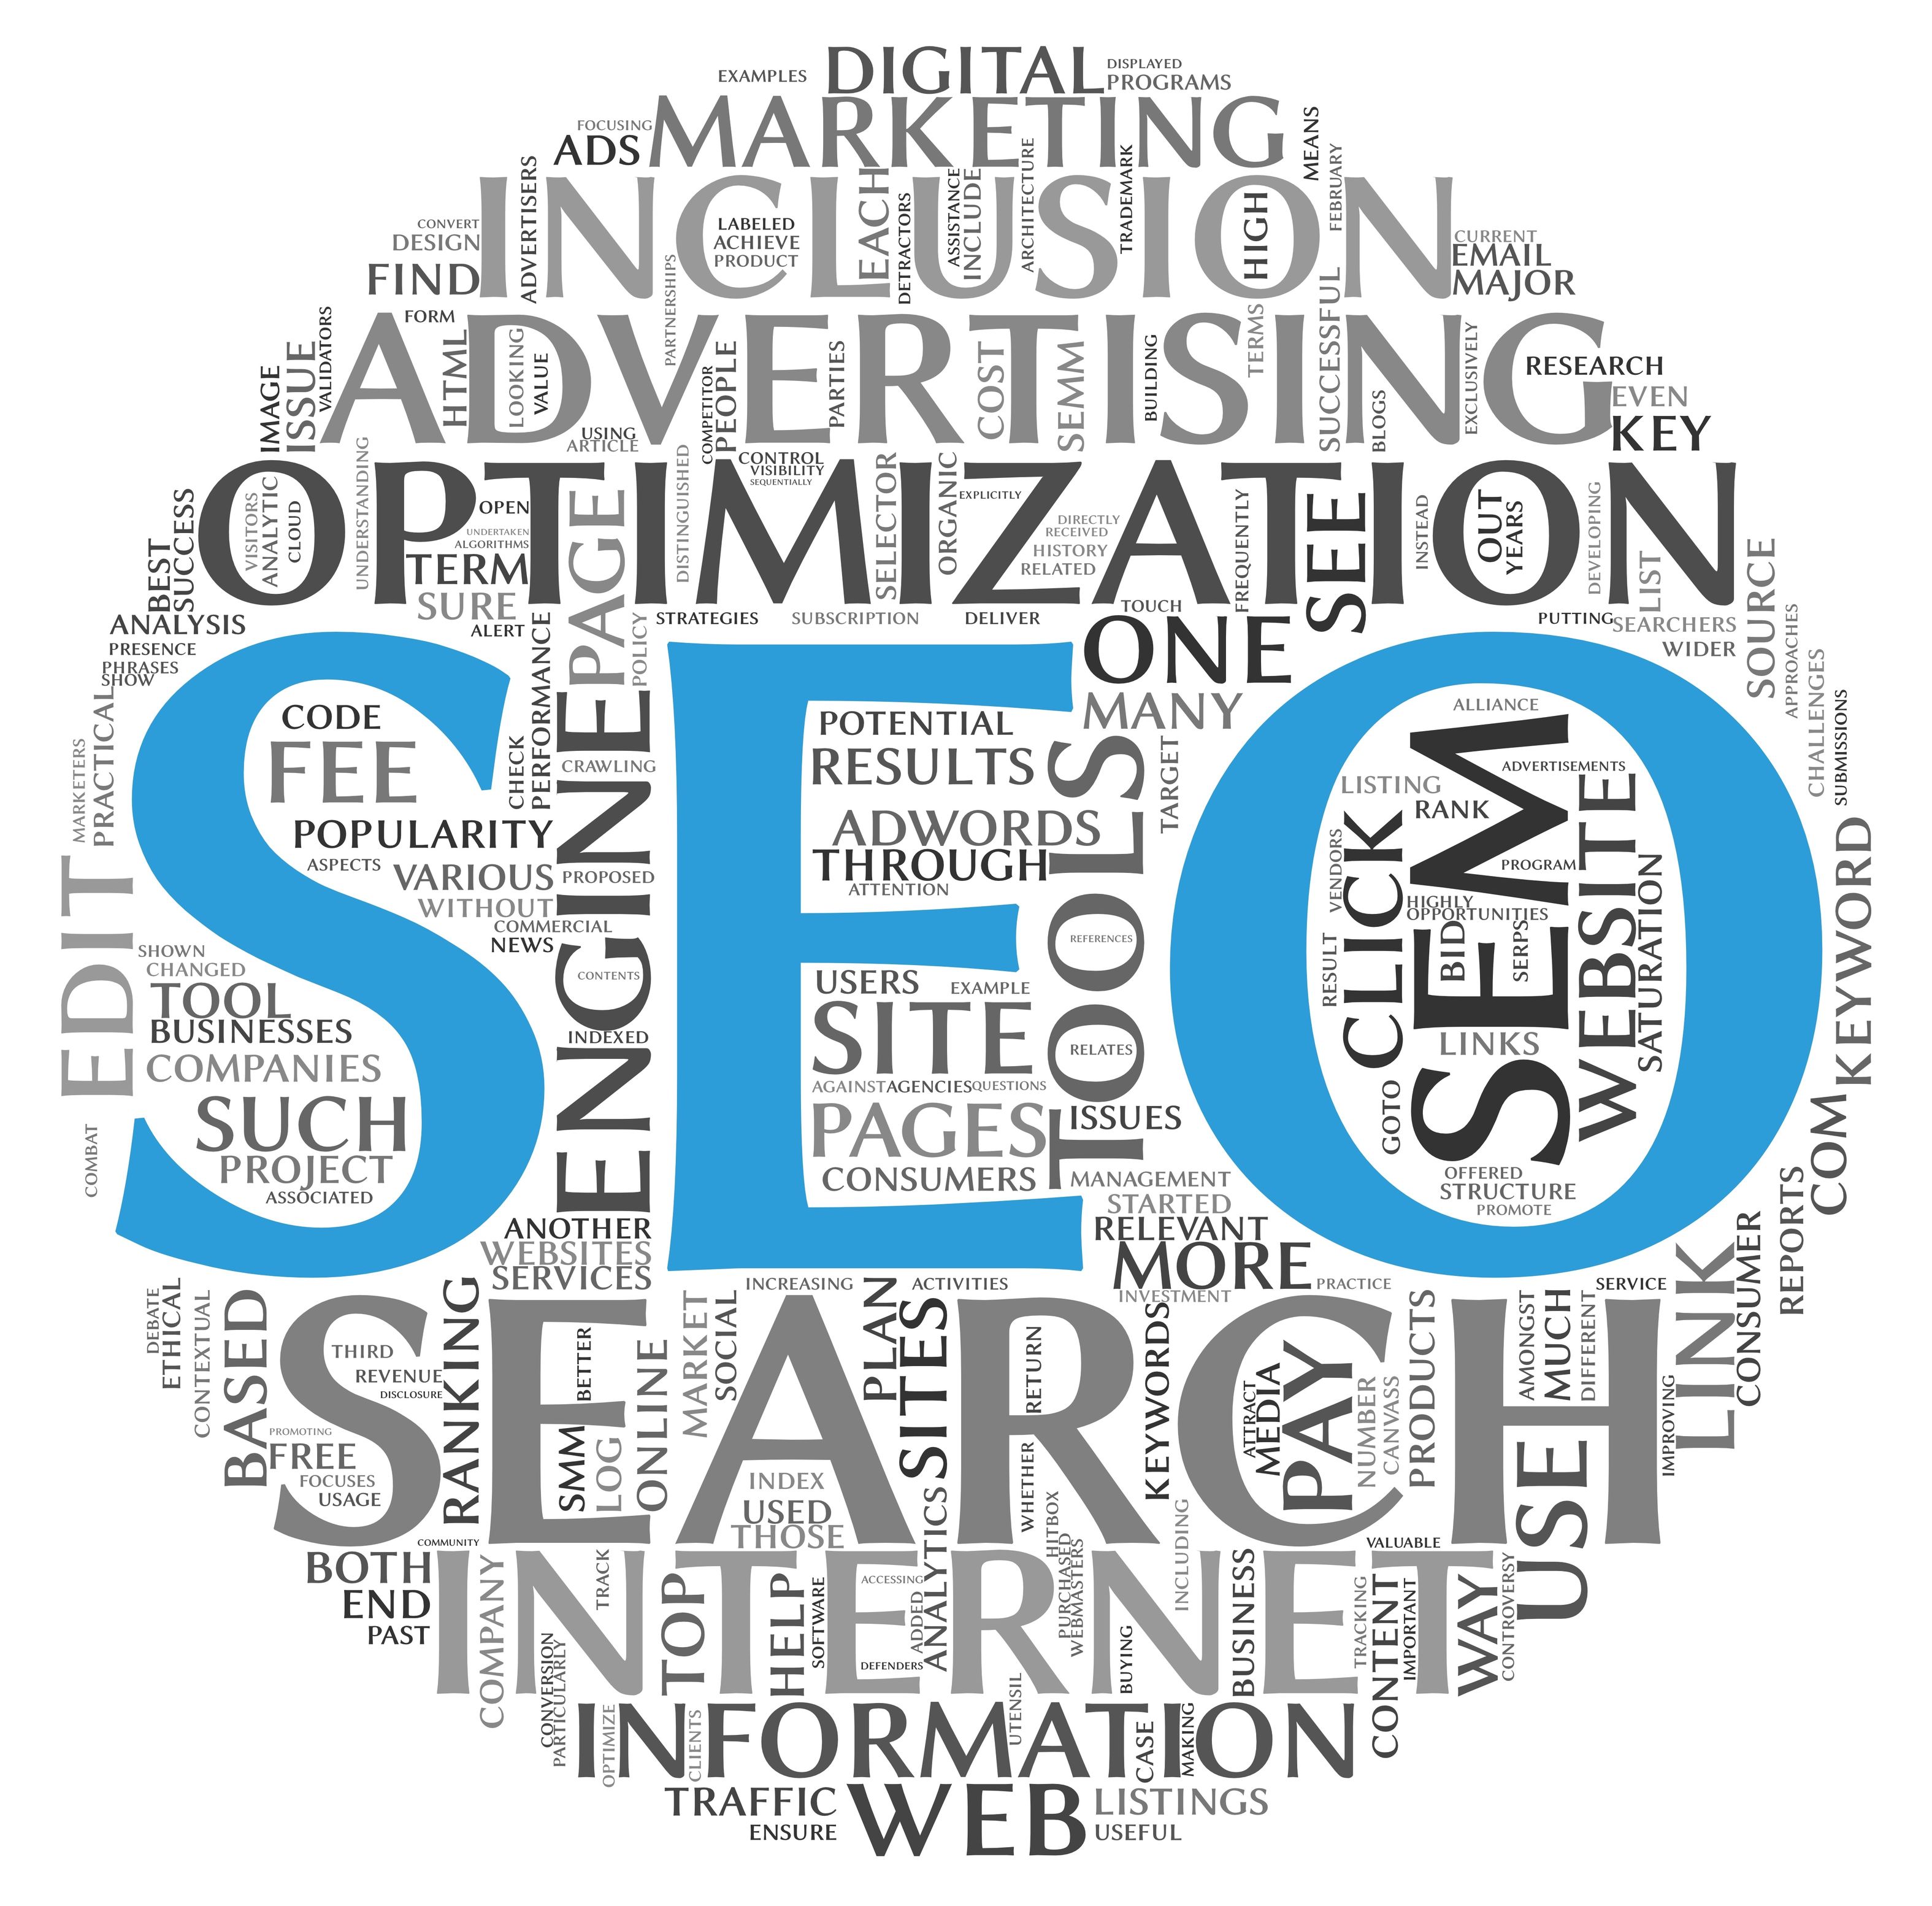 3 Elements of Search Engine Optimization